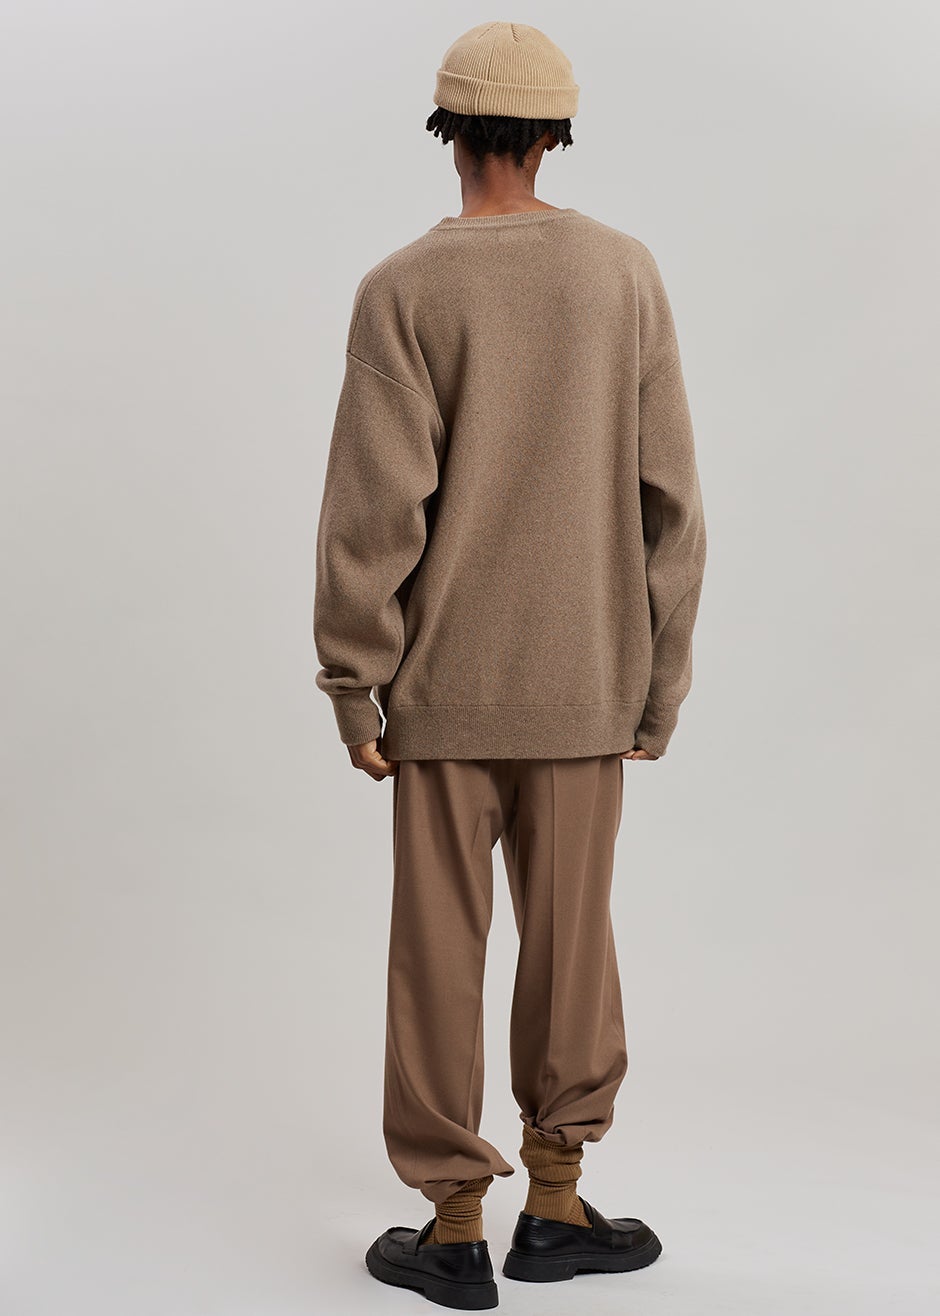 Hadrien Italian Recycled Cashmere Sweater - Taupe - 12